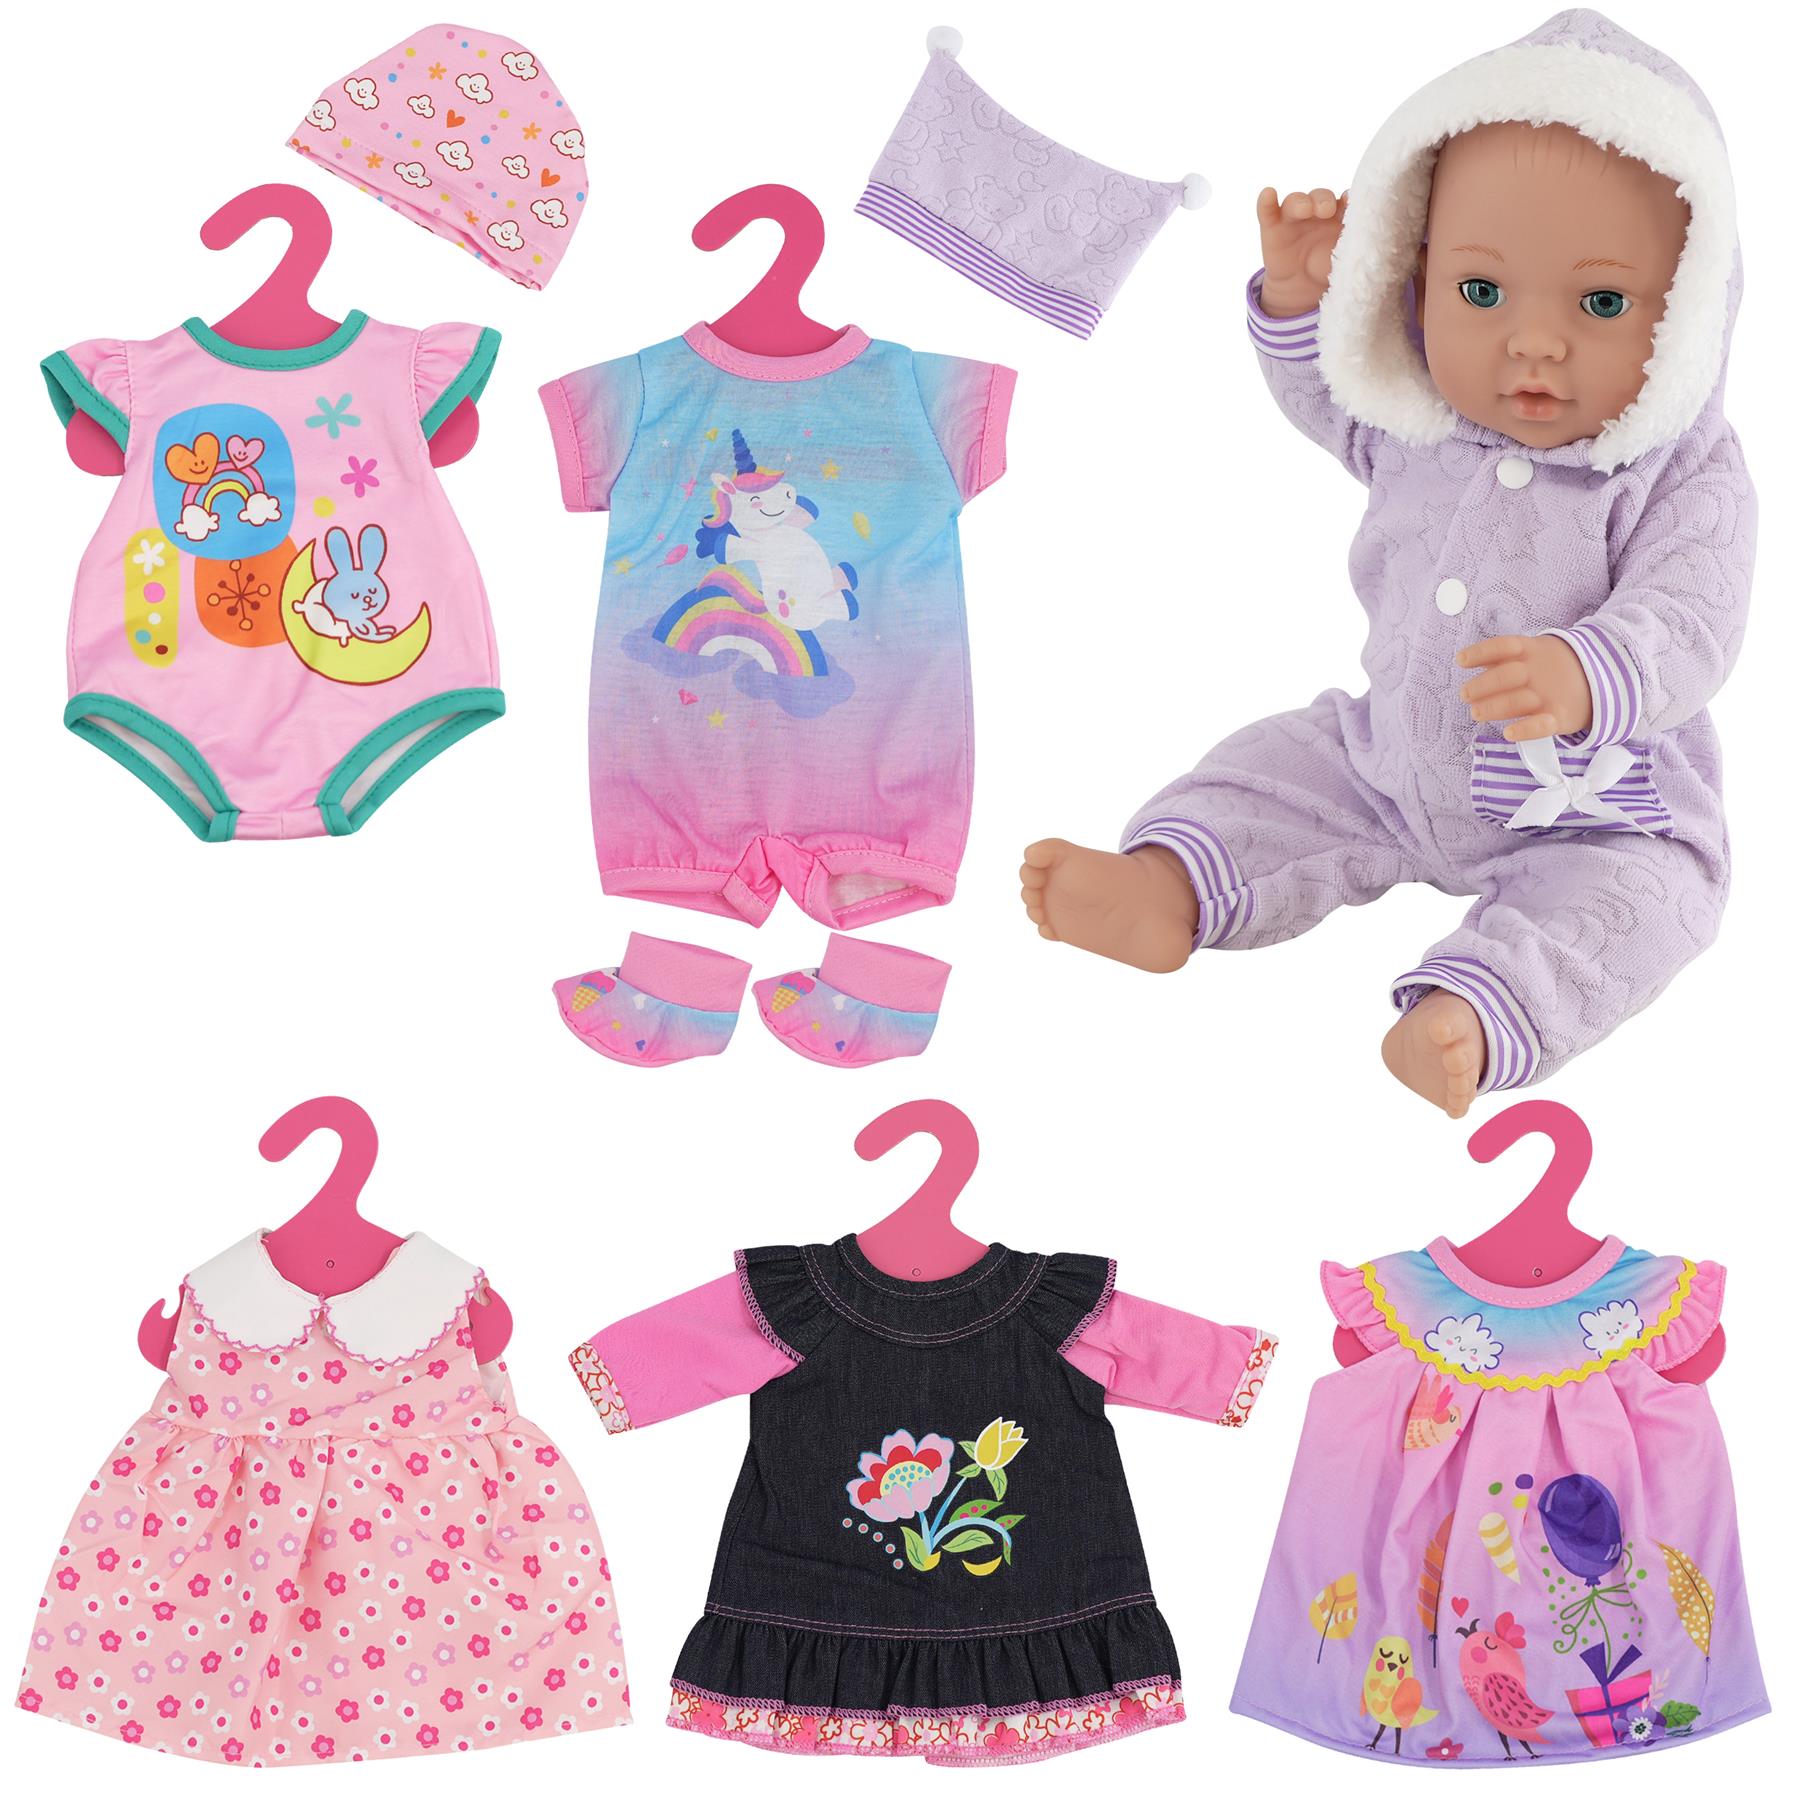 Baby Doll Set of 6 Outfits 12-16" by BiBi Doll - The Magic Toy Shop